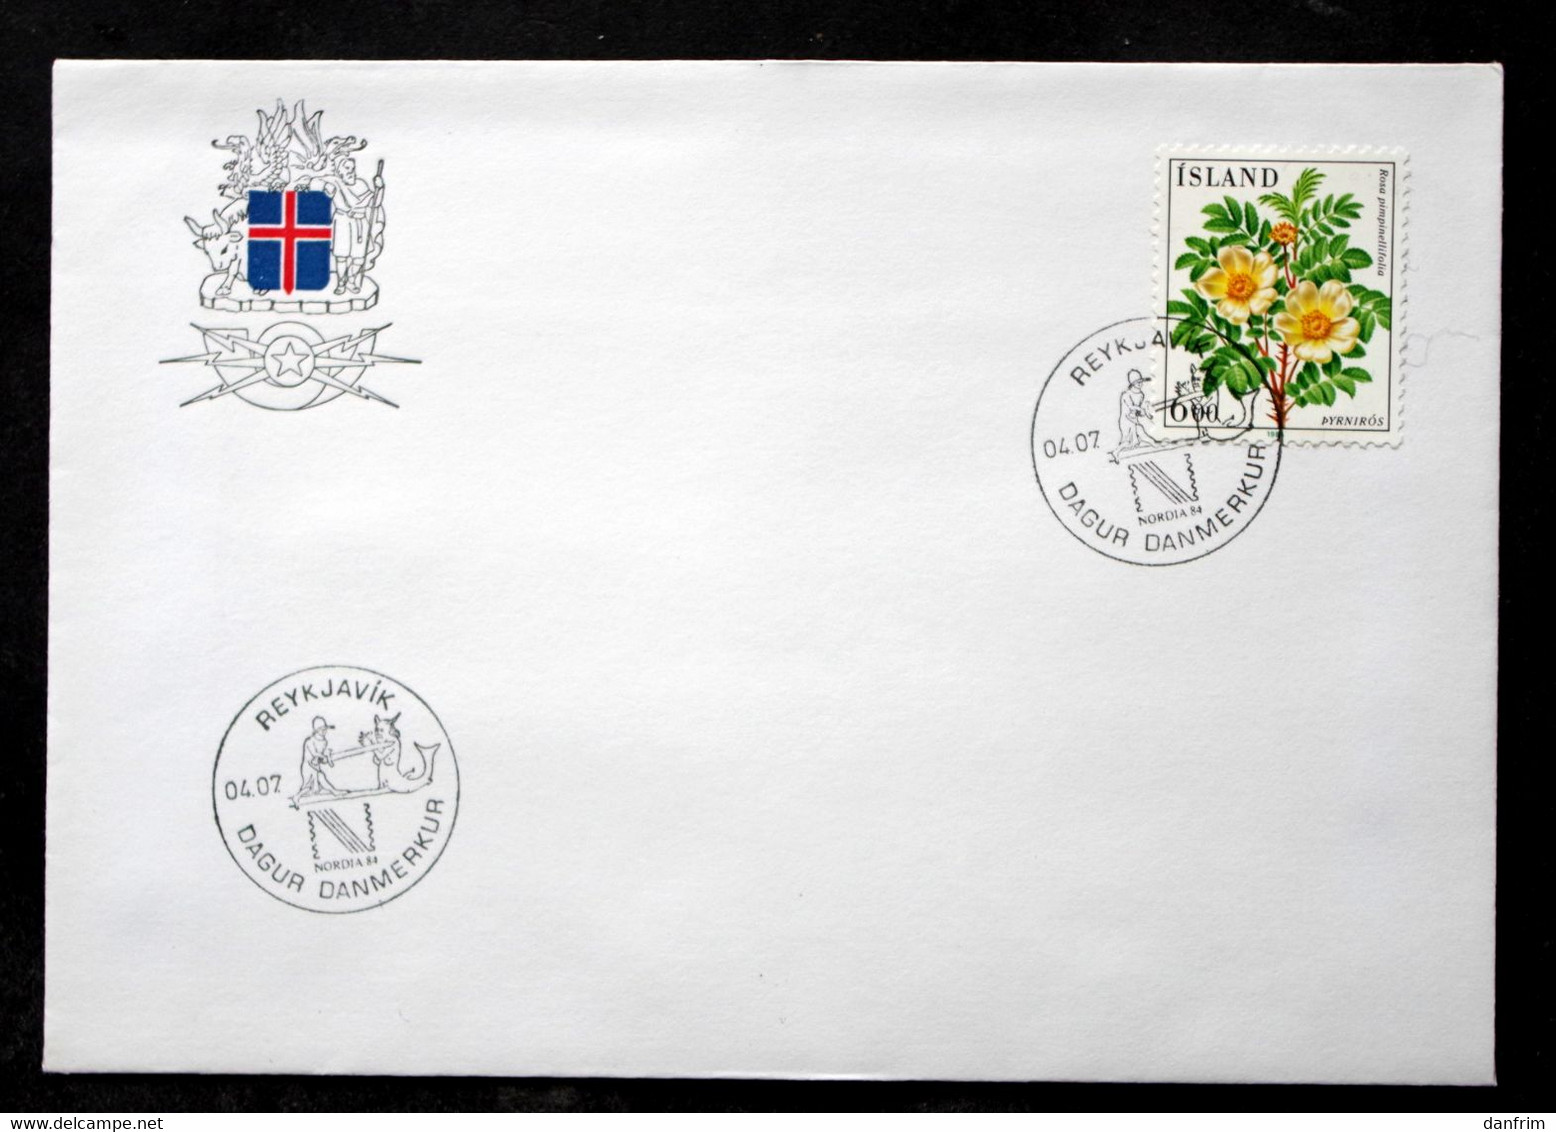 Iceland 1984 Flowers MiNr.612 Special Cancel Cover   ( Lot 6554 ) - Covers & Documents